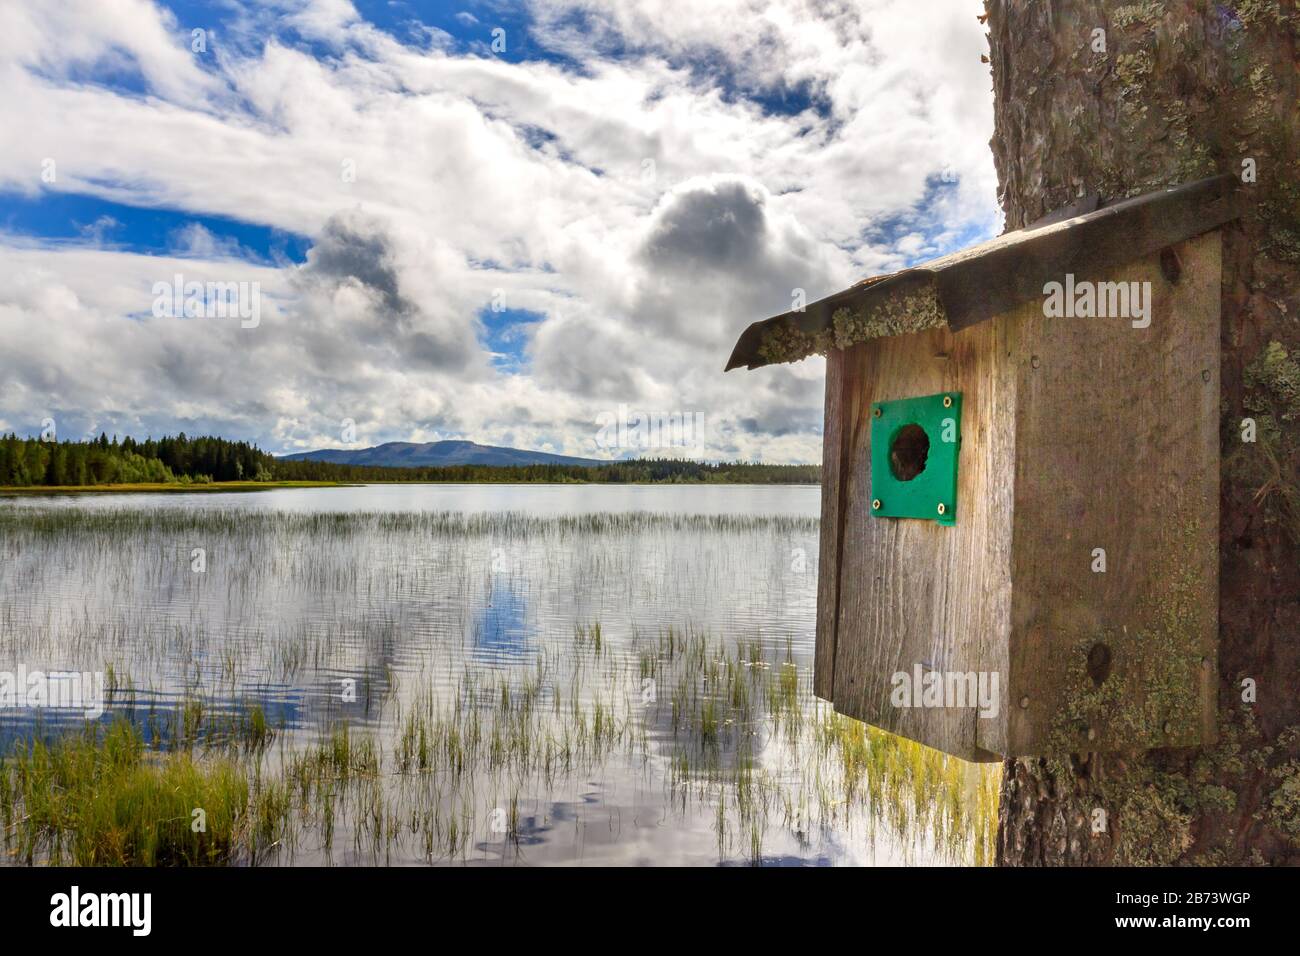 Bird house with green entrance hole overseeing beautiful lake. Location, location, location as they say in real estate. Stock Photo